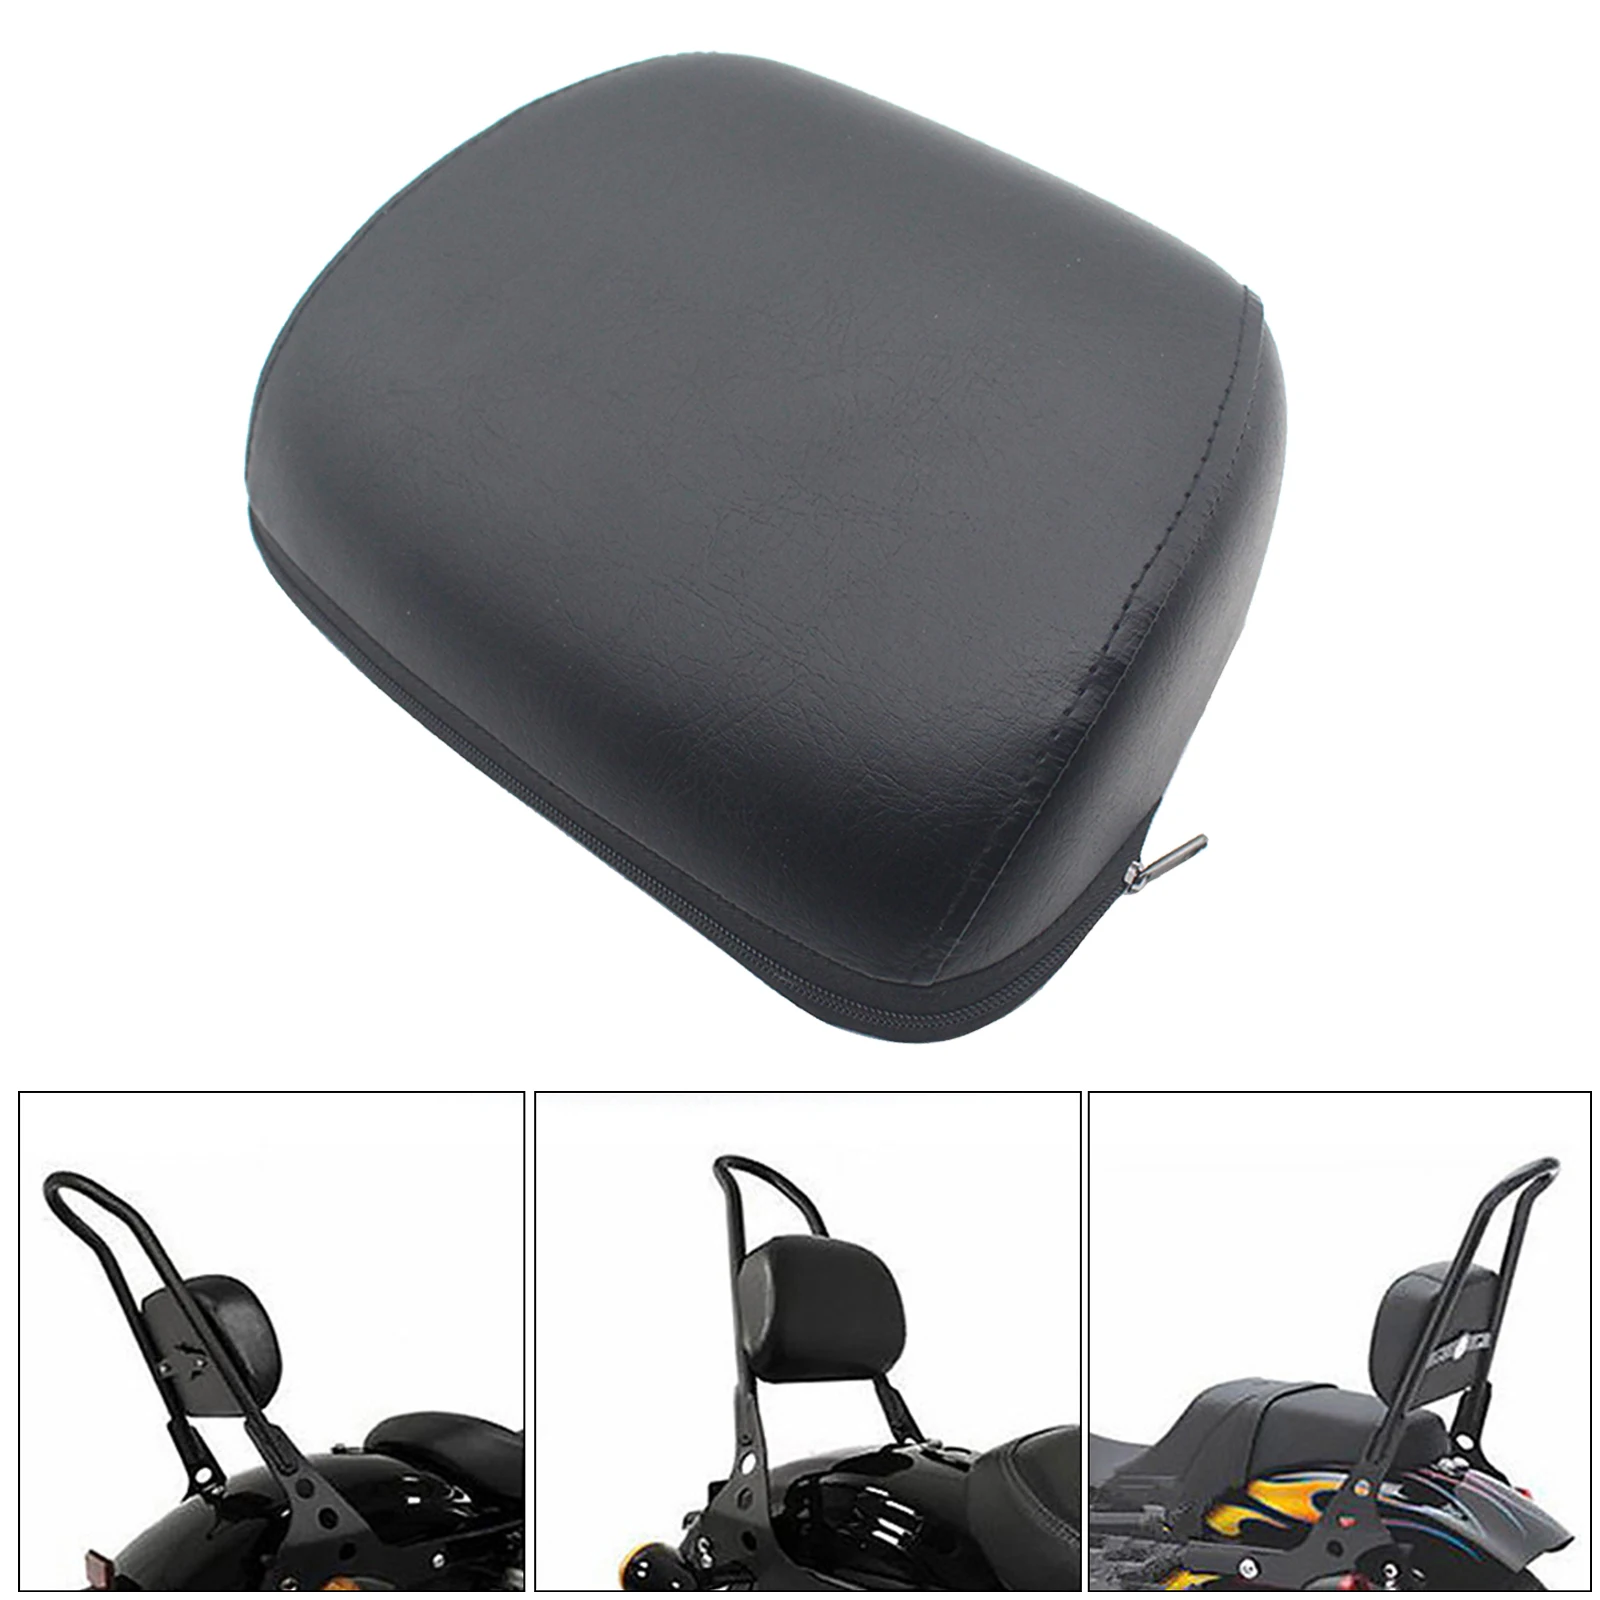 Backrest Pad Passenger Passenger Sissy Bar Detachable for Harley 883 1200 48 Replacement Part Motorcycle Parts